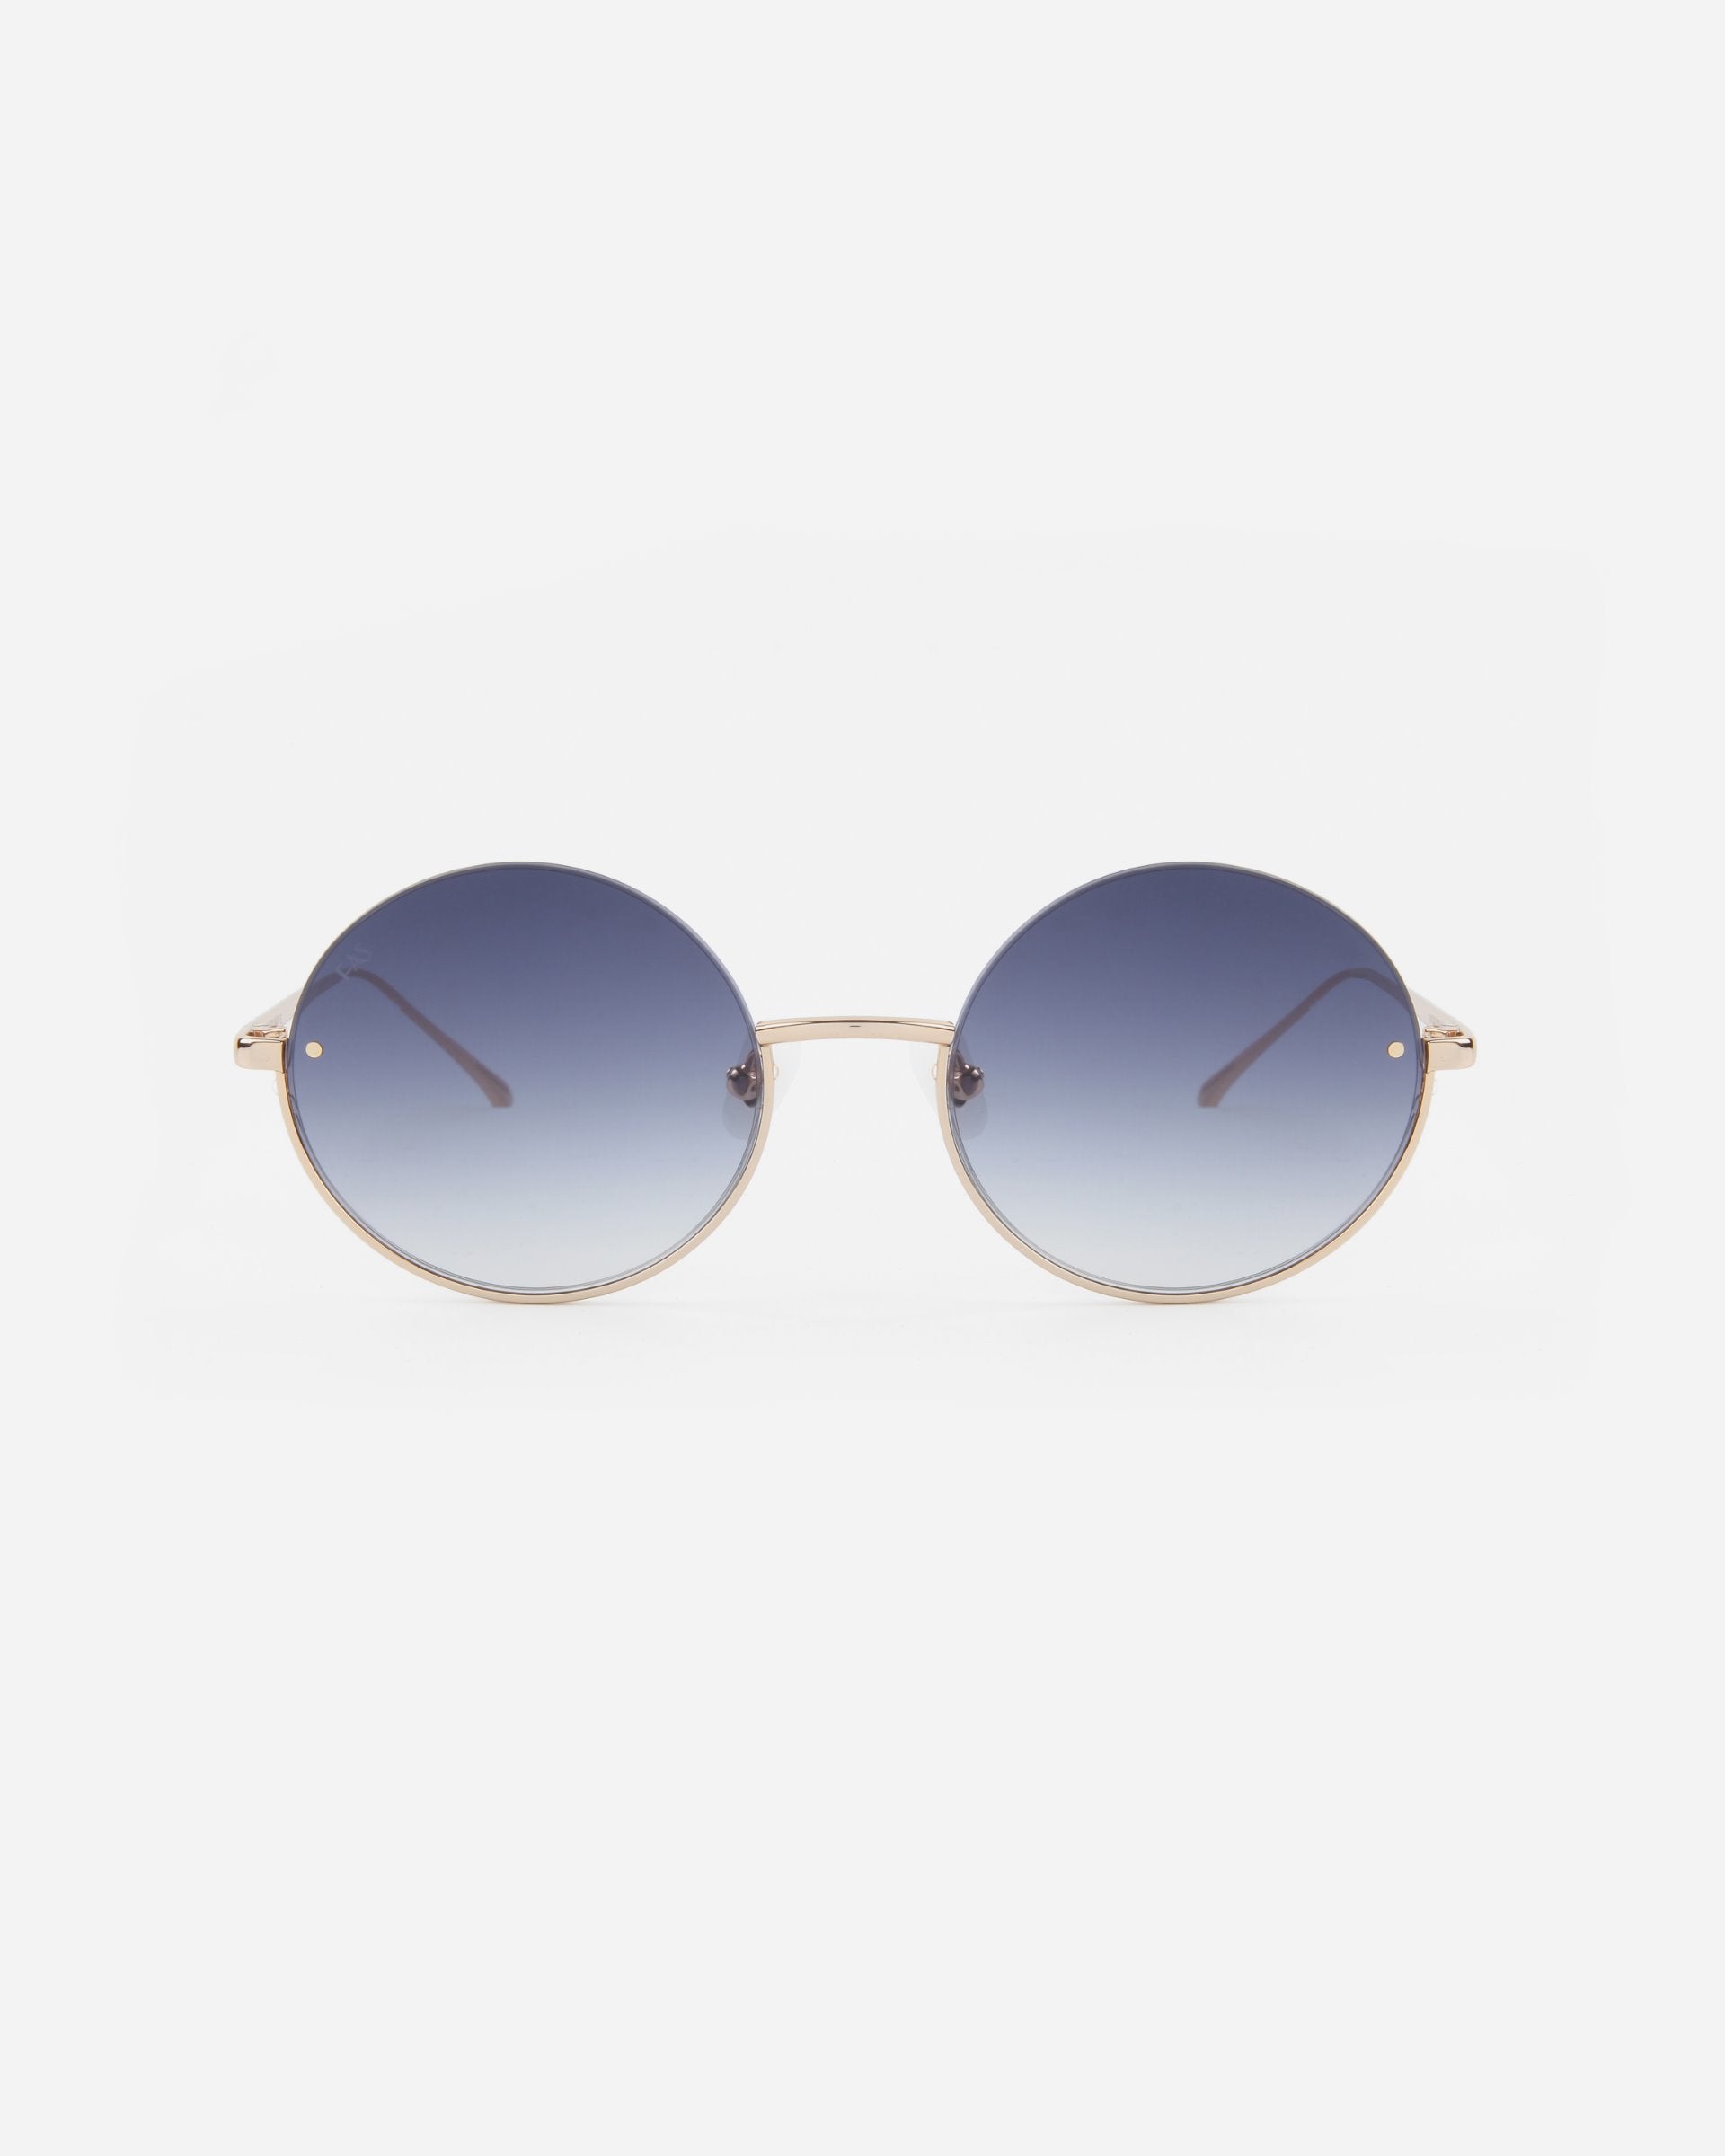 A pair of Skyline sunglasses by For Art&#39;s Sake® with gradient nylon lenses fading from dark blue at the top to clear at the bottom. The gold plated stainless steel frames are thin and metallic, featuring a minimalist design with no visible brand markings. These UVA &amp; UVB-protected sunglasses are set against a plain white background.